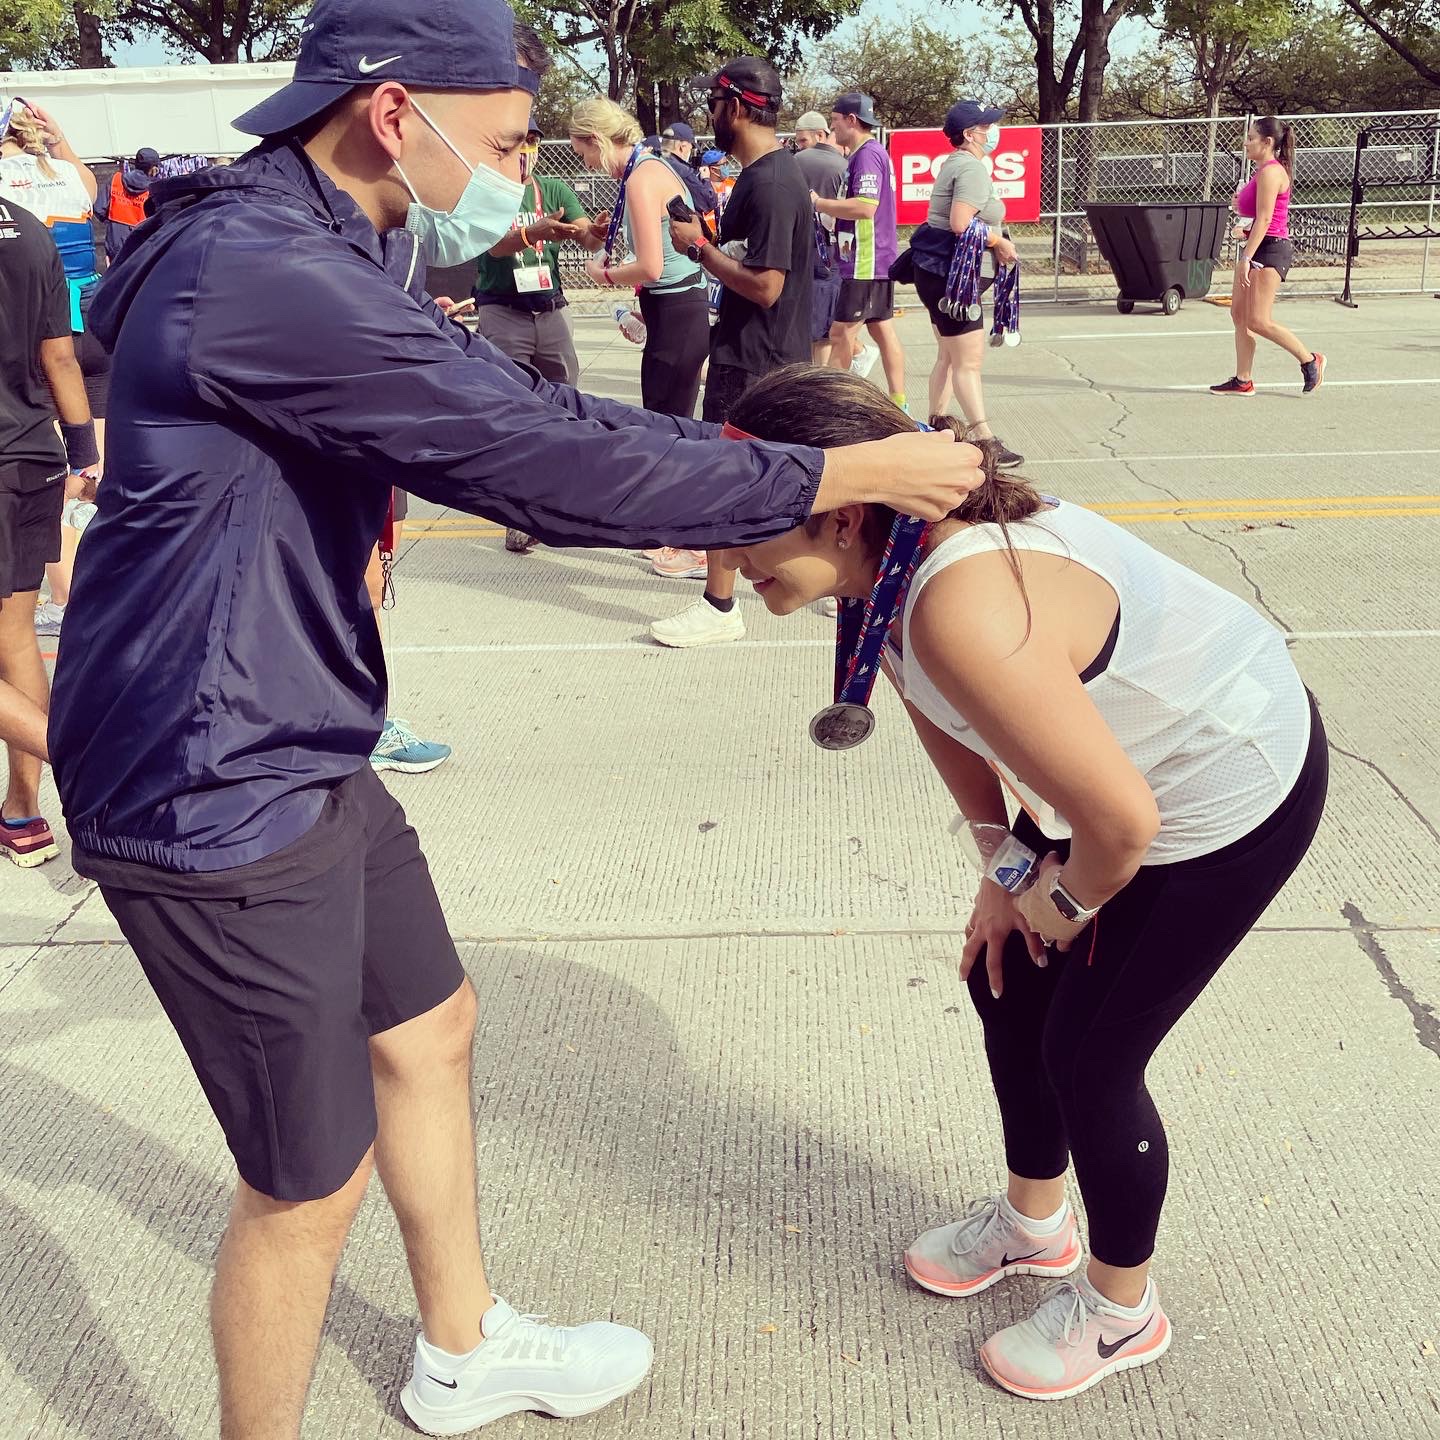 Bensenville resident runs Chicago Marathon first time ever; Brother from Addison urges her on, presents her with medal